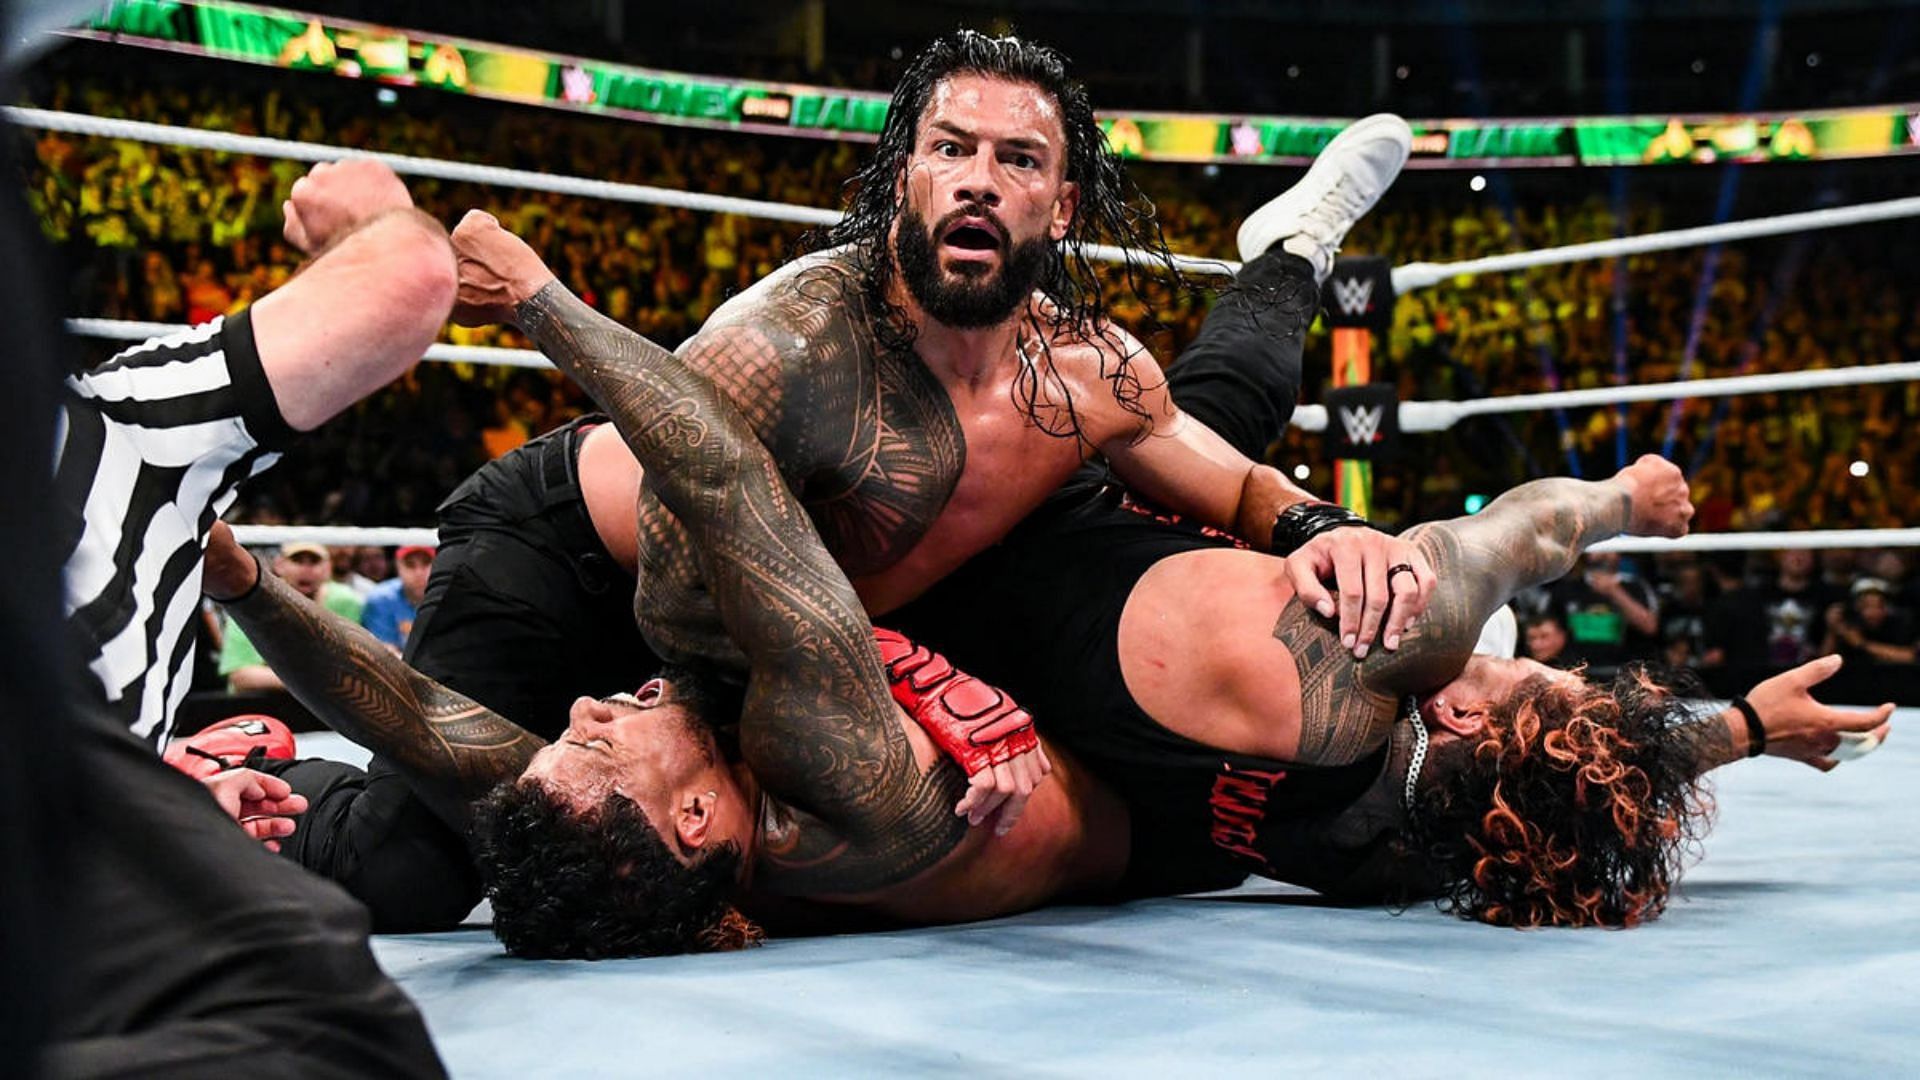 Roman Reigns was not left in the best state after that match